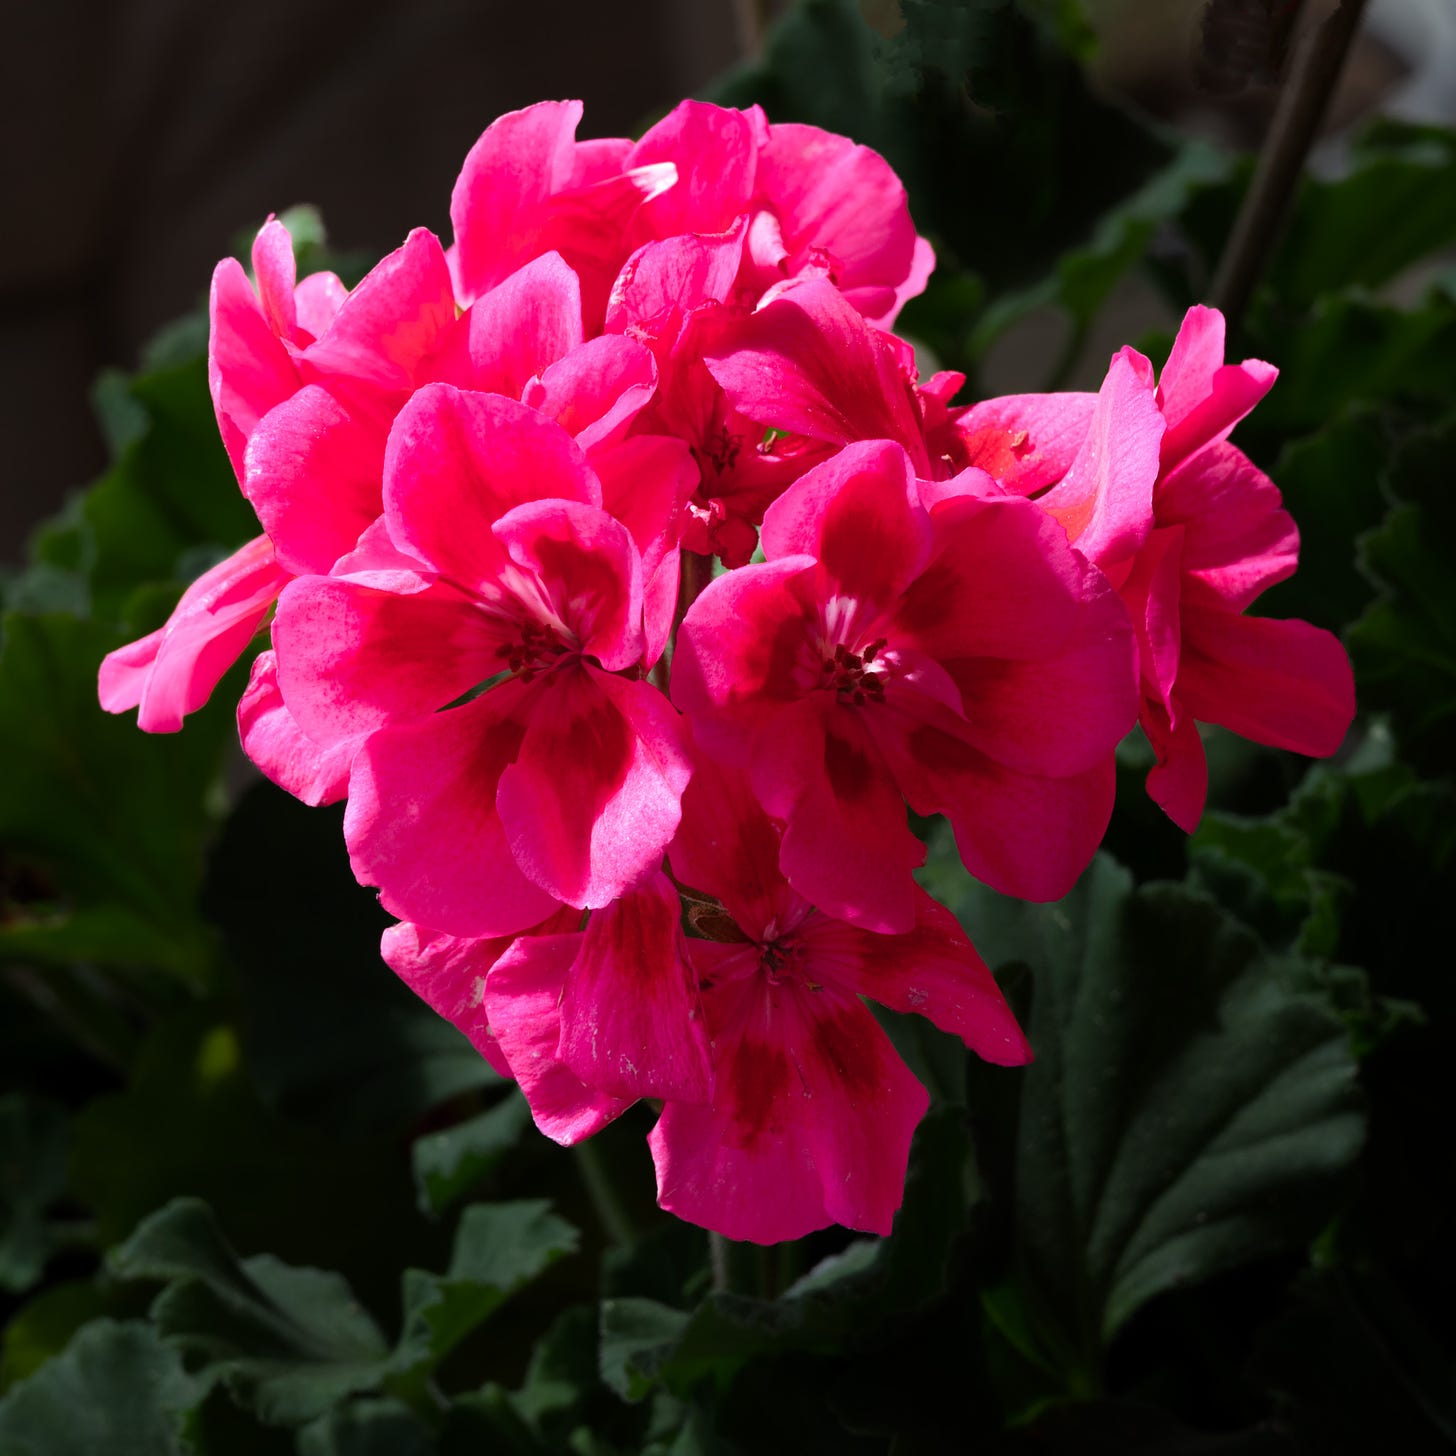 A dark pink geranium cluster of blooms against the dark green of the leaves